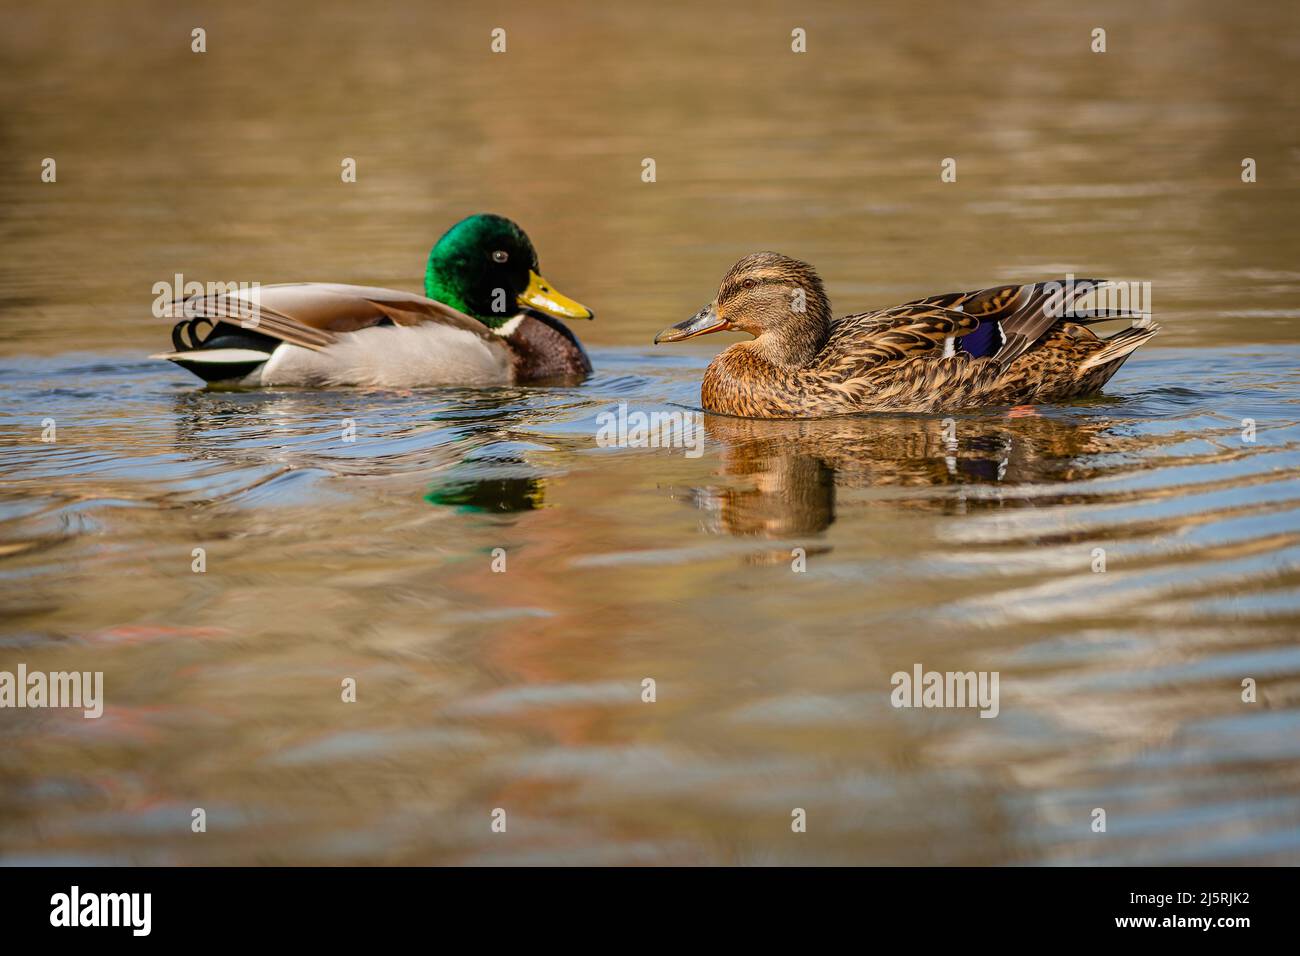 A couple of mallard ducks swimming in a lake face to face on a spring sunny day. Reflection of the birds and blue sky in the water. Stock Photo